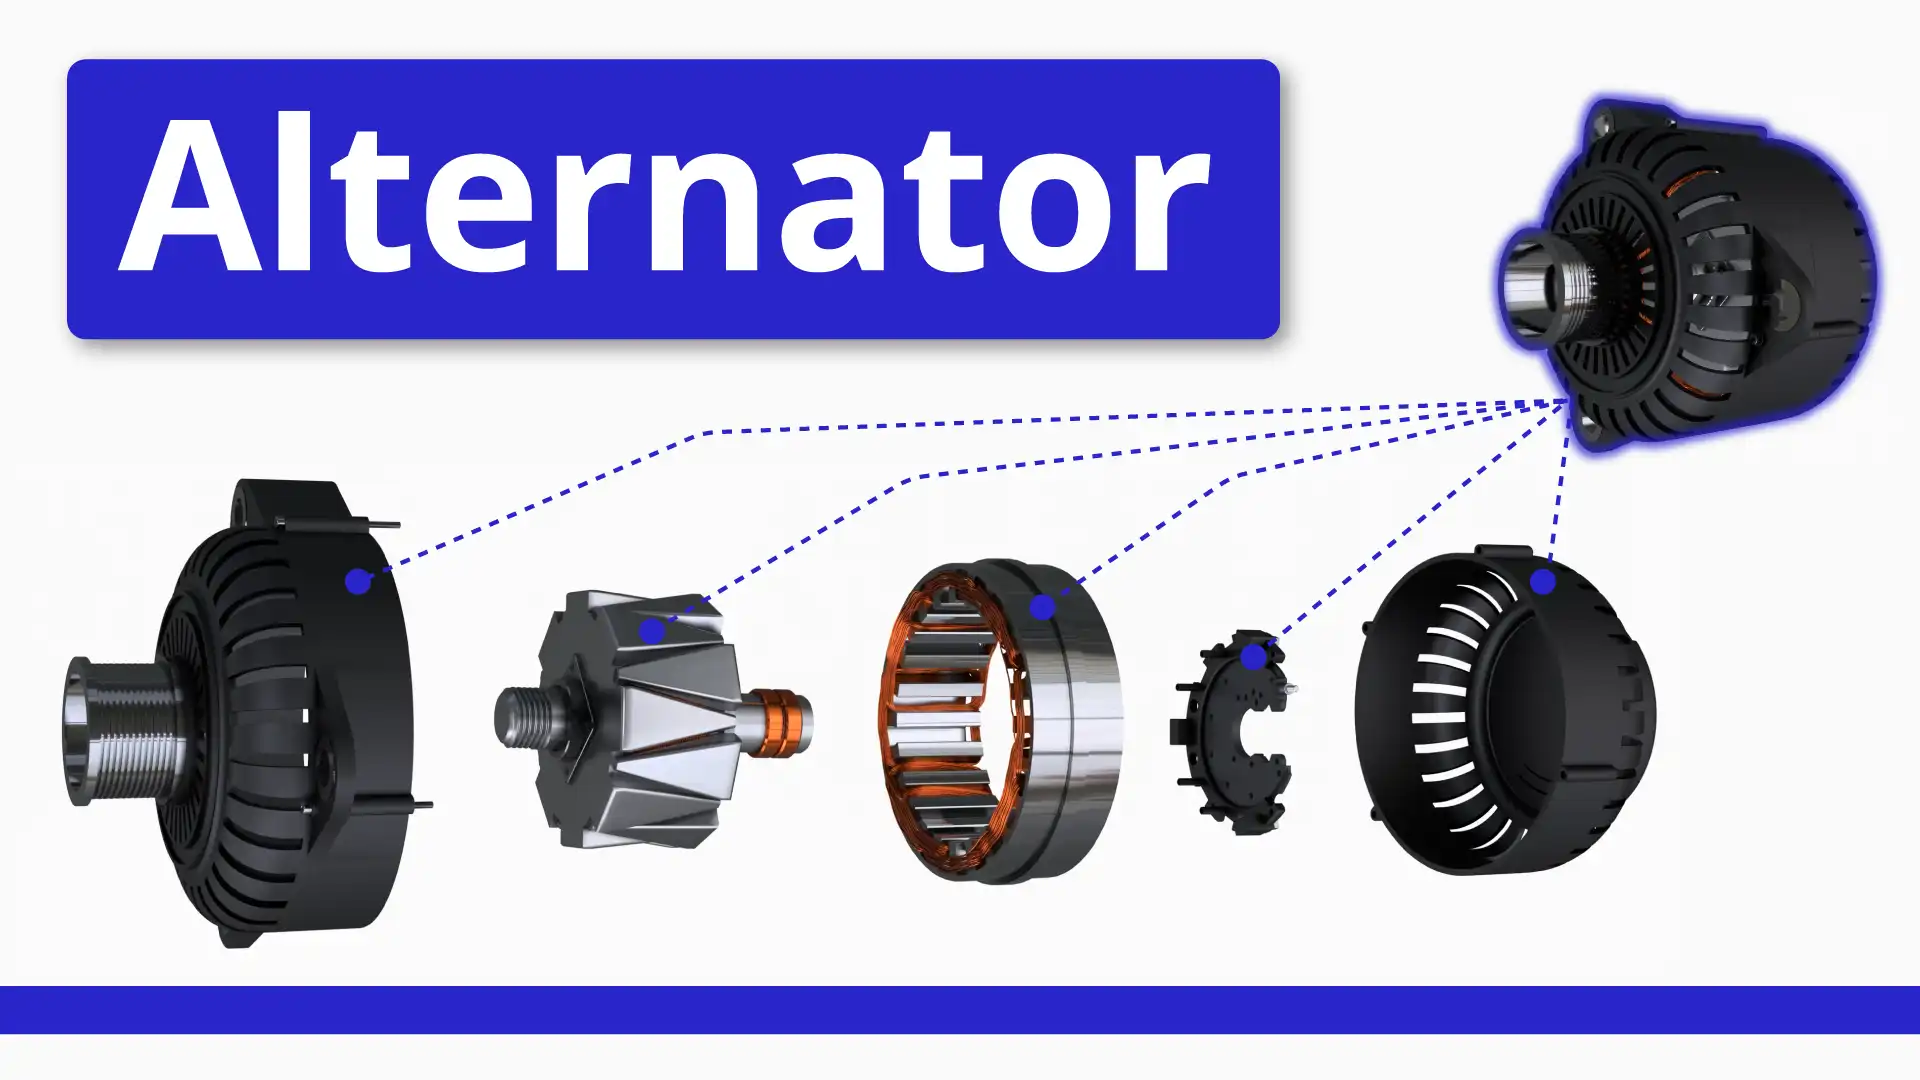 How to Check if Alternator Needs Replacement